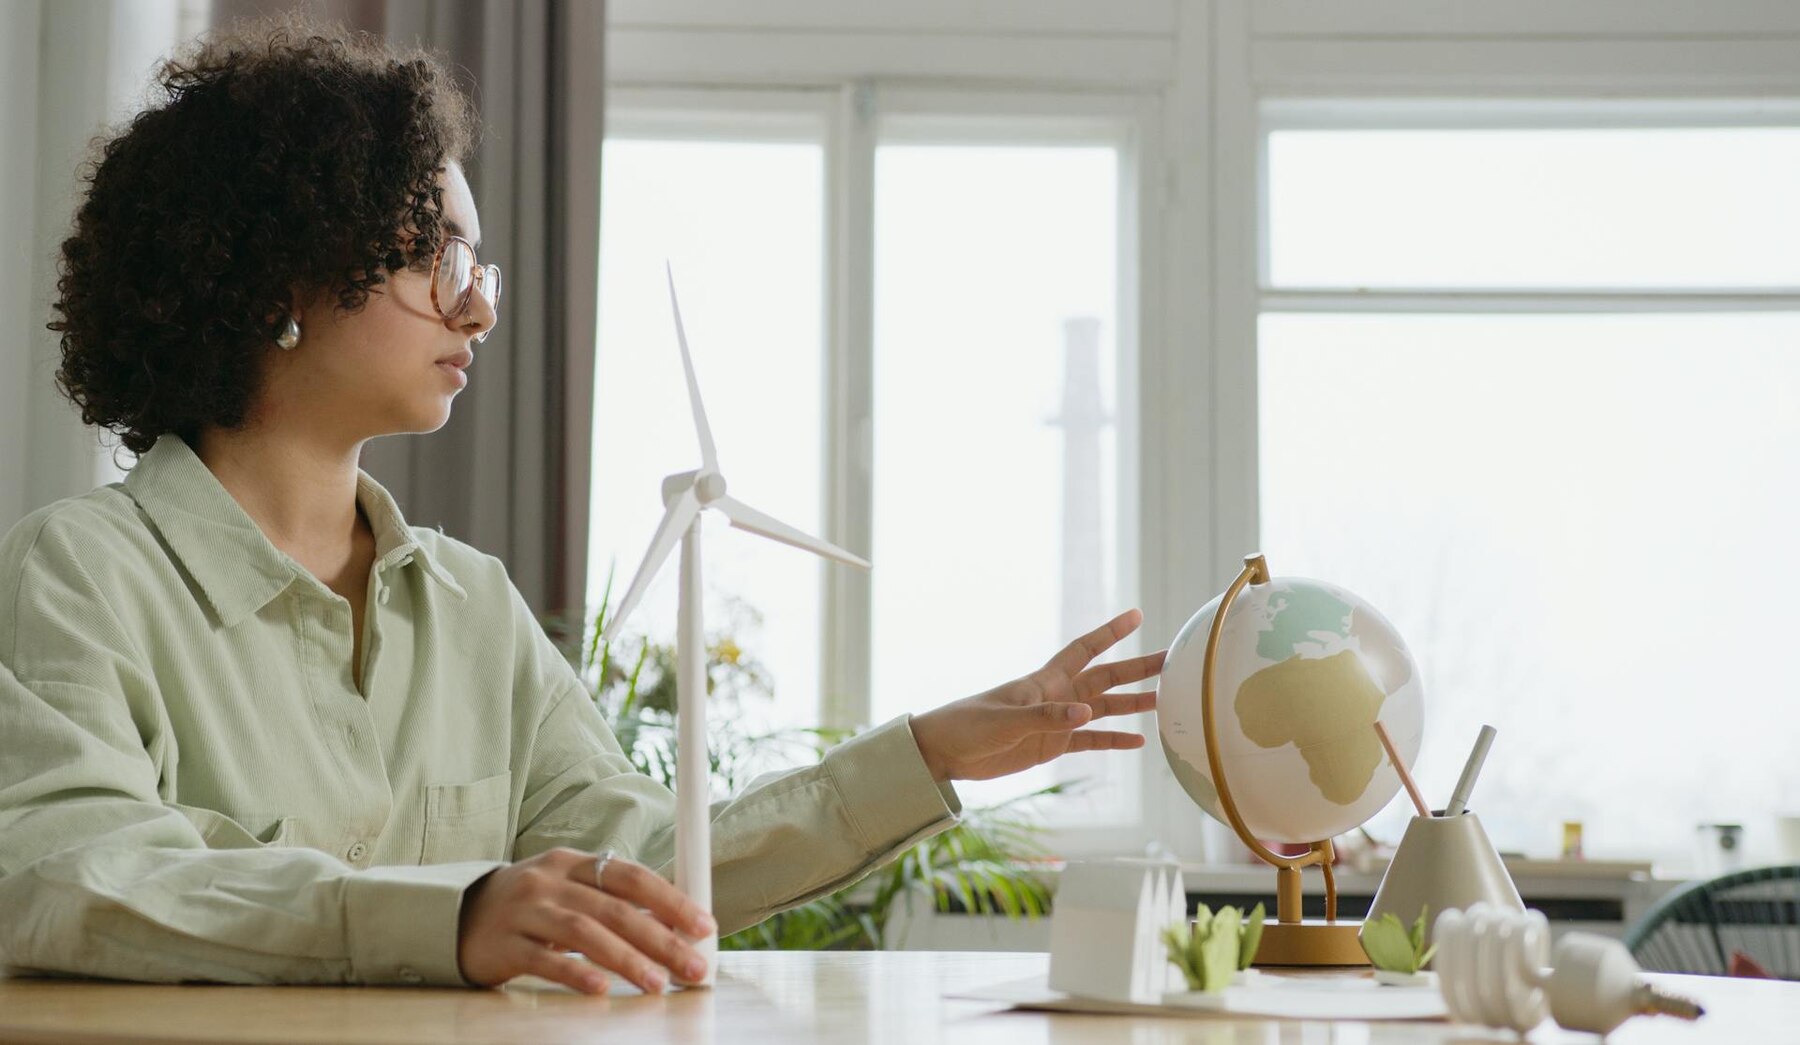 A woman sitting at a table with a globe and wind turbine